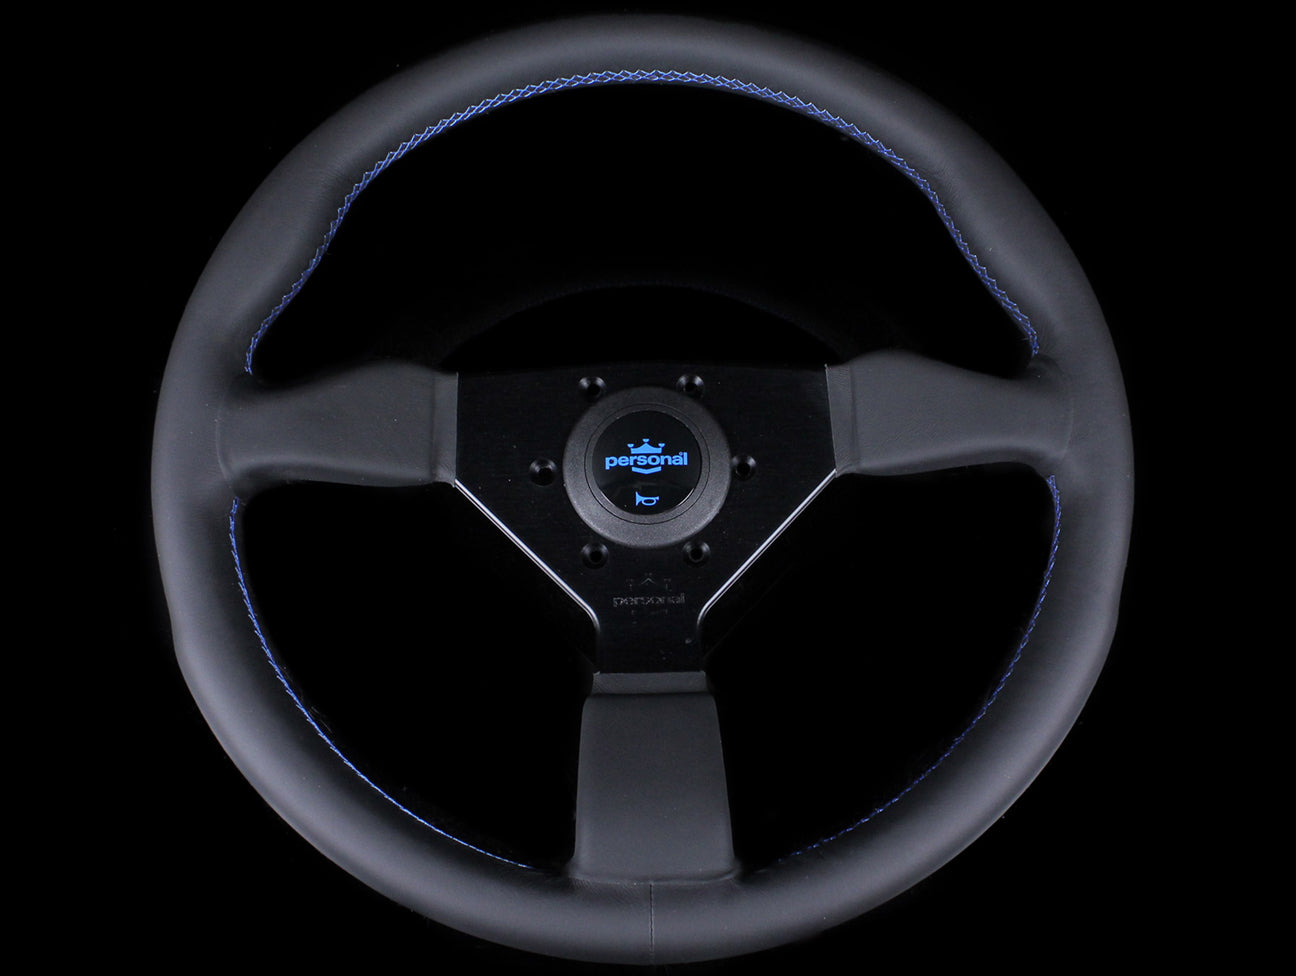 Personal Neo Grinta 330mm Steering Wheel - Black Leather / Blue Stitch